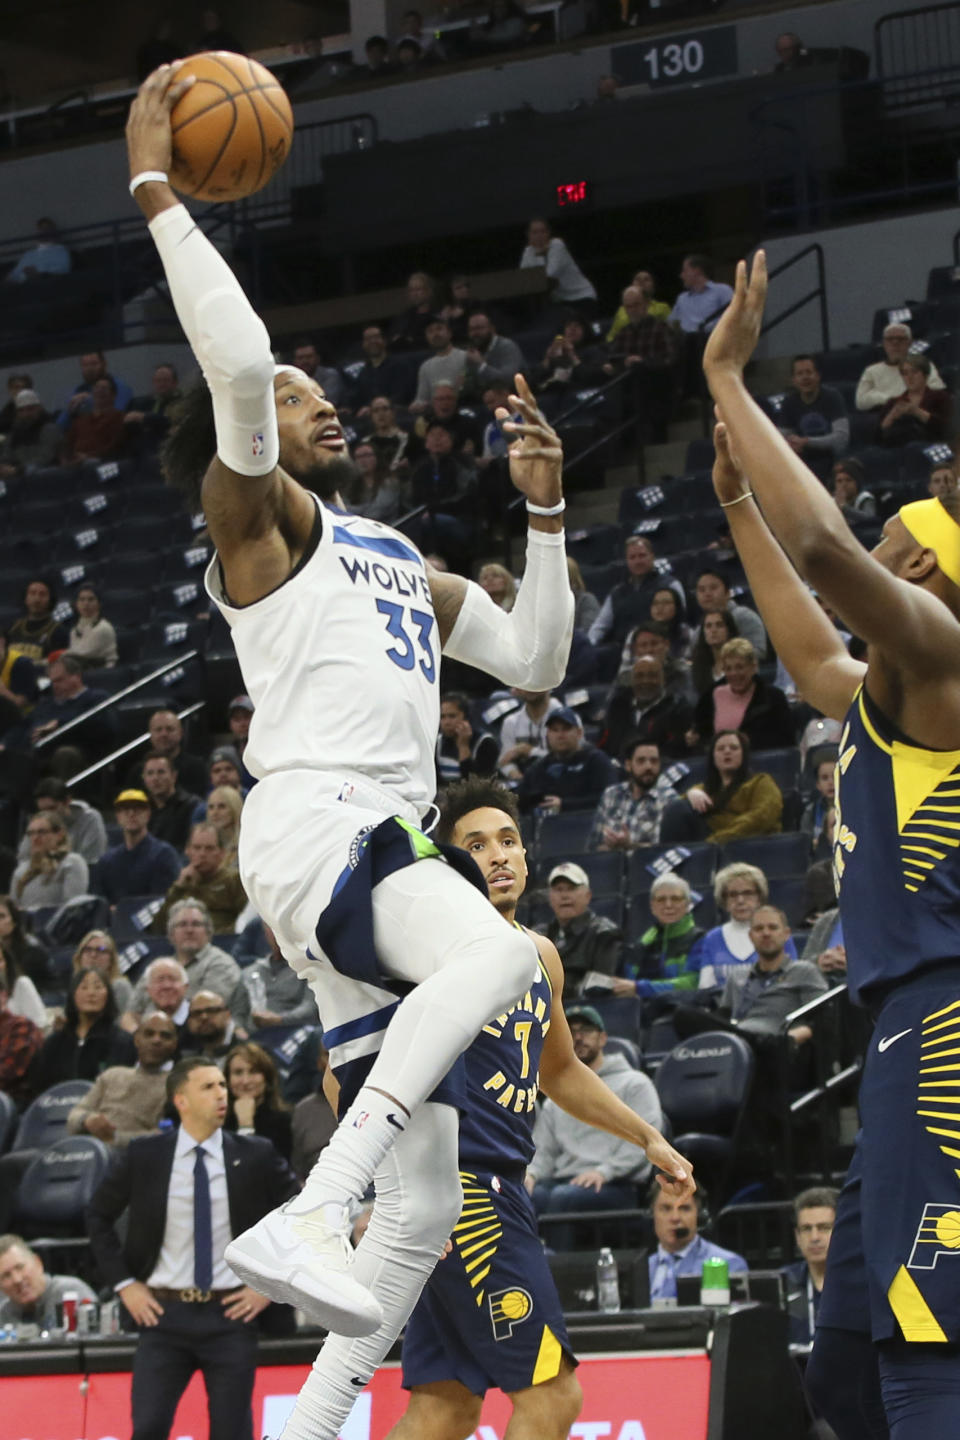 Minnesota Timberwolves' Robert Covington, left, shoots as Indiana Pacers' Myles Turner defends in the first half of an NBA basketball game Wednesday, Jan. 15, 2020, in Minneapolis. (AP Photo/Jim Mone)